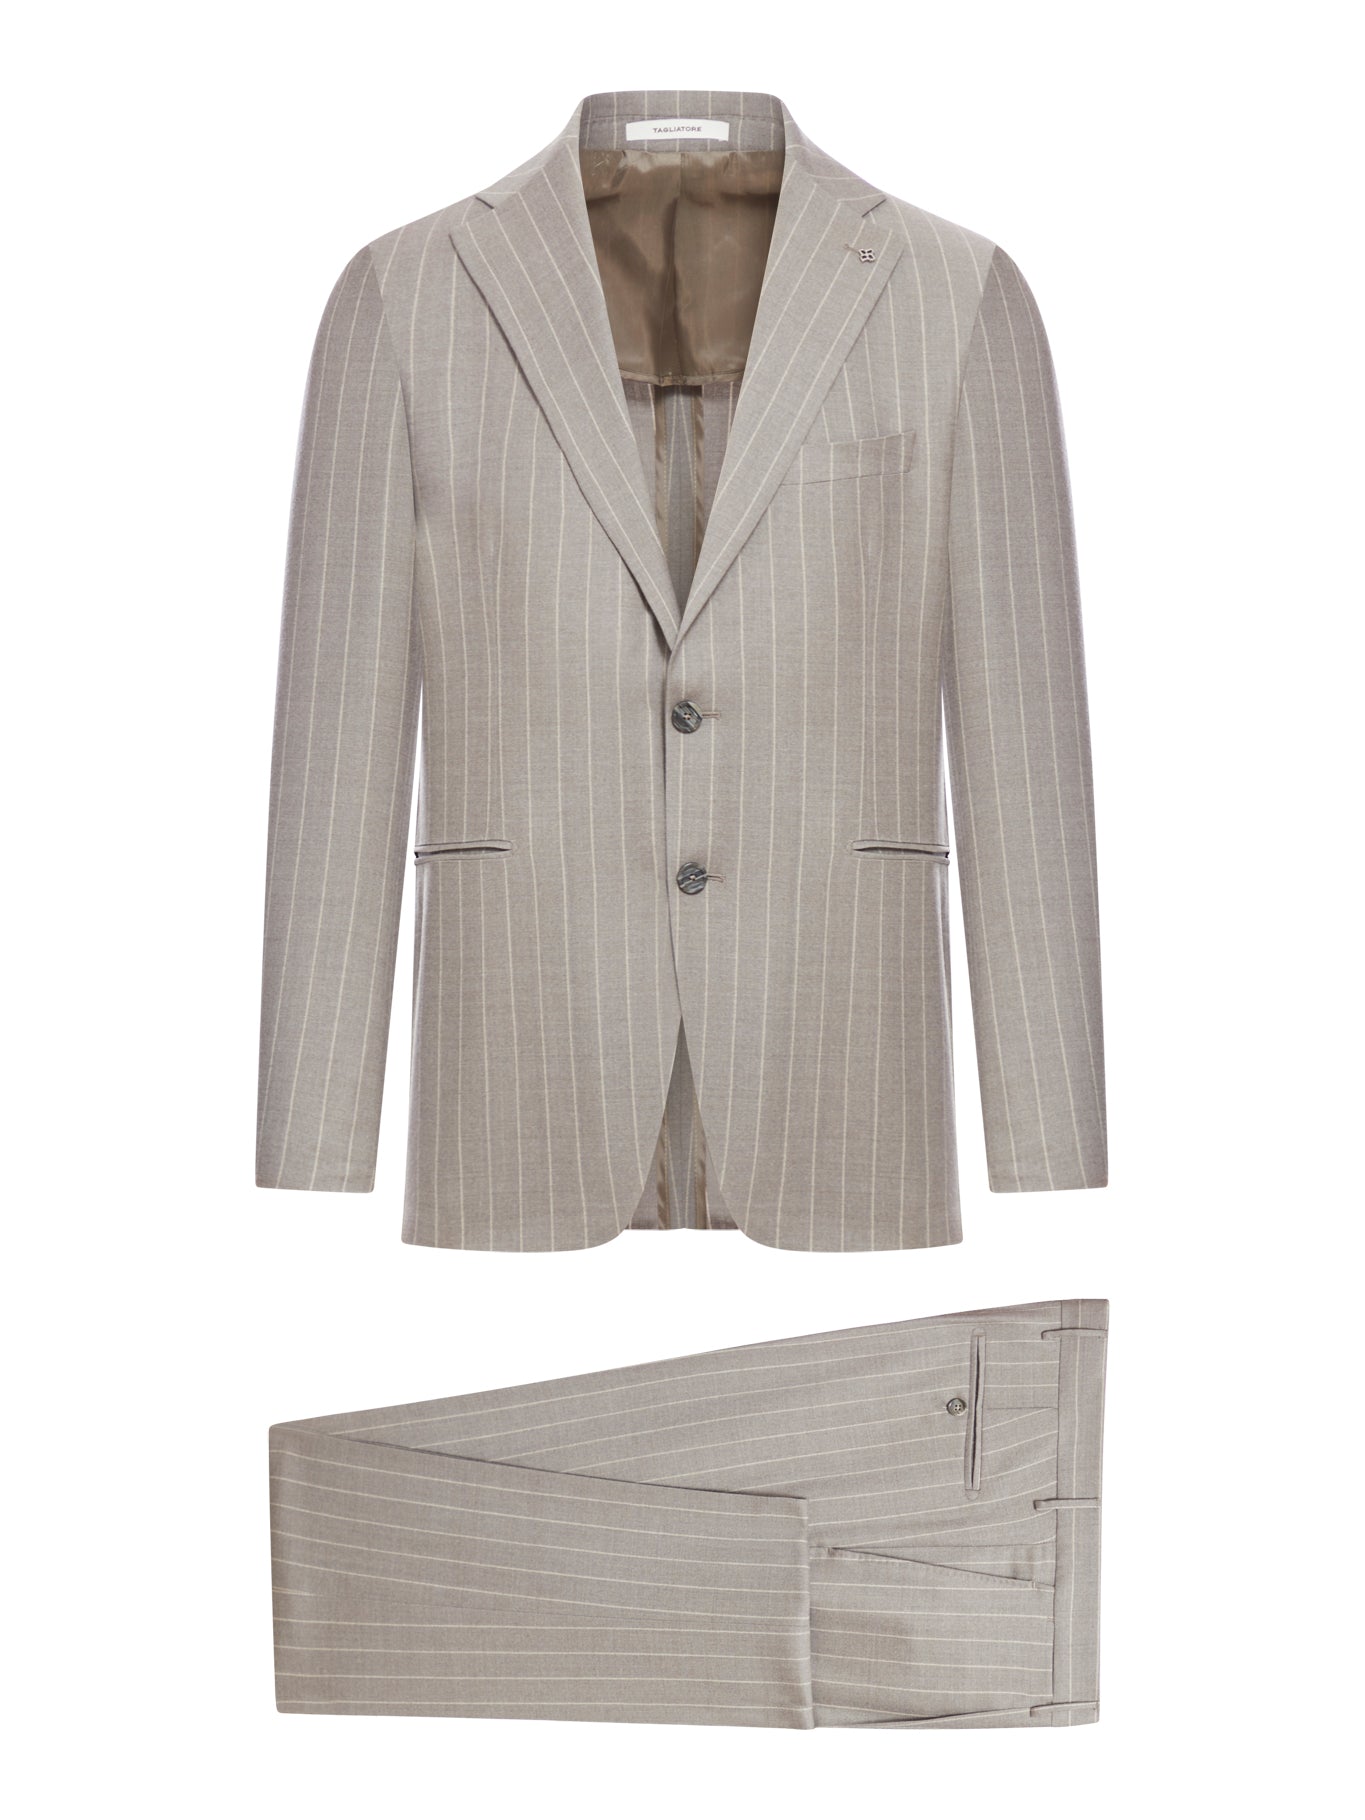 Tailored suit in pinstripe fabric